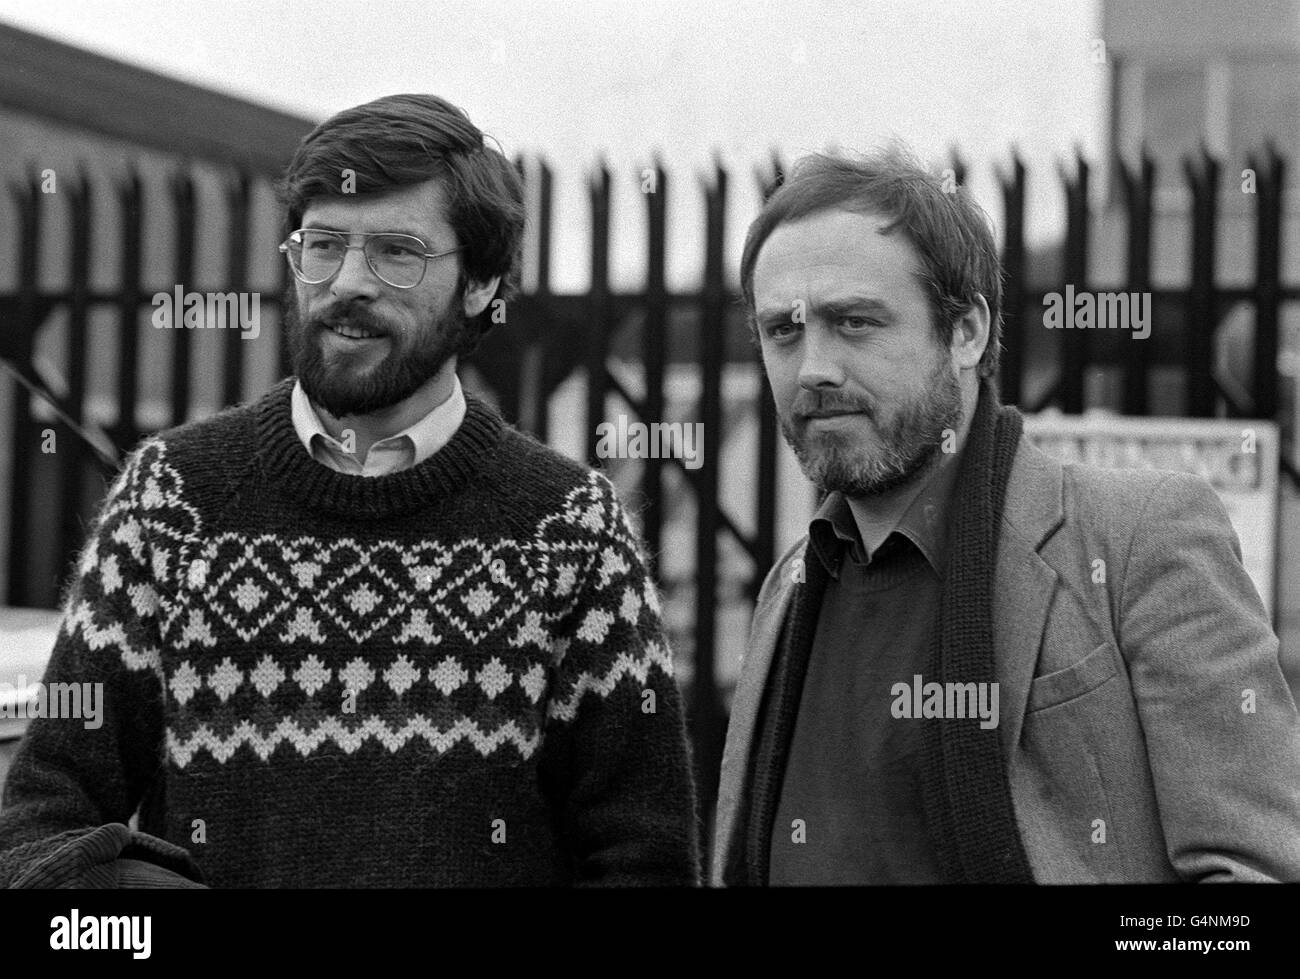 The two Sinn Fein Leaders banned from Britain after the Greater London Council invited them to London. Gerry Adams (L) is vice-president, and Danny Morrison is the organisation's publicity director. Stock Photo